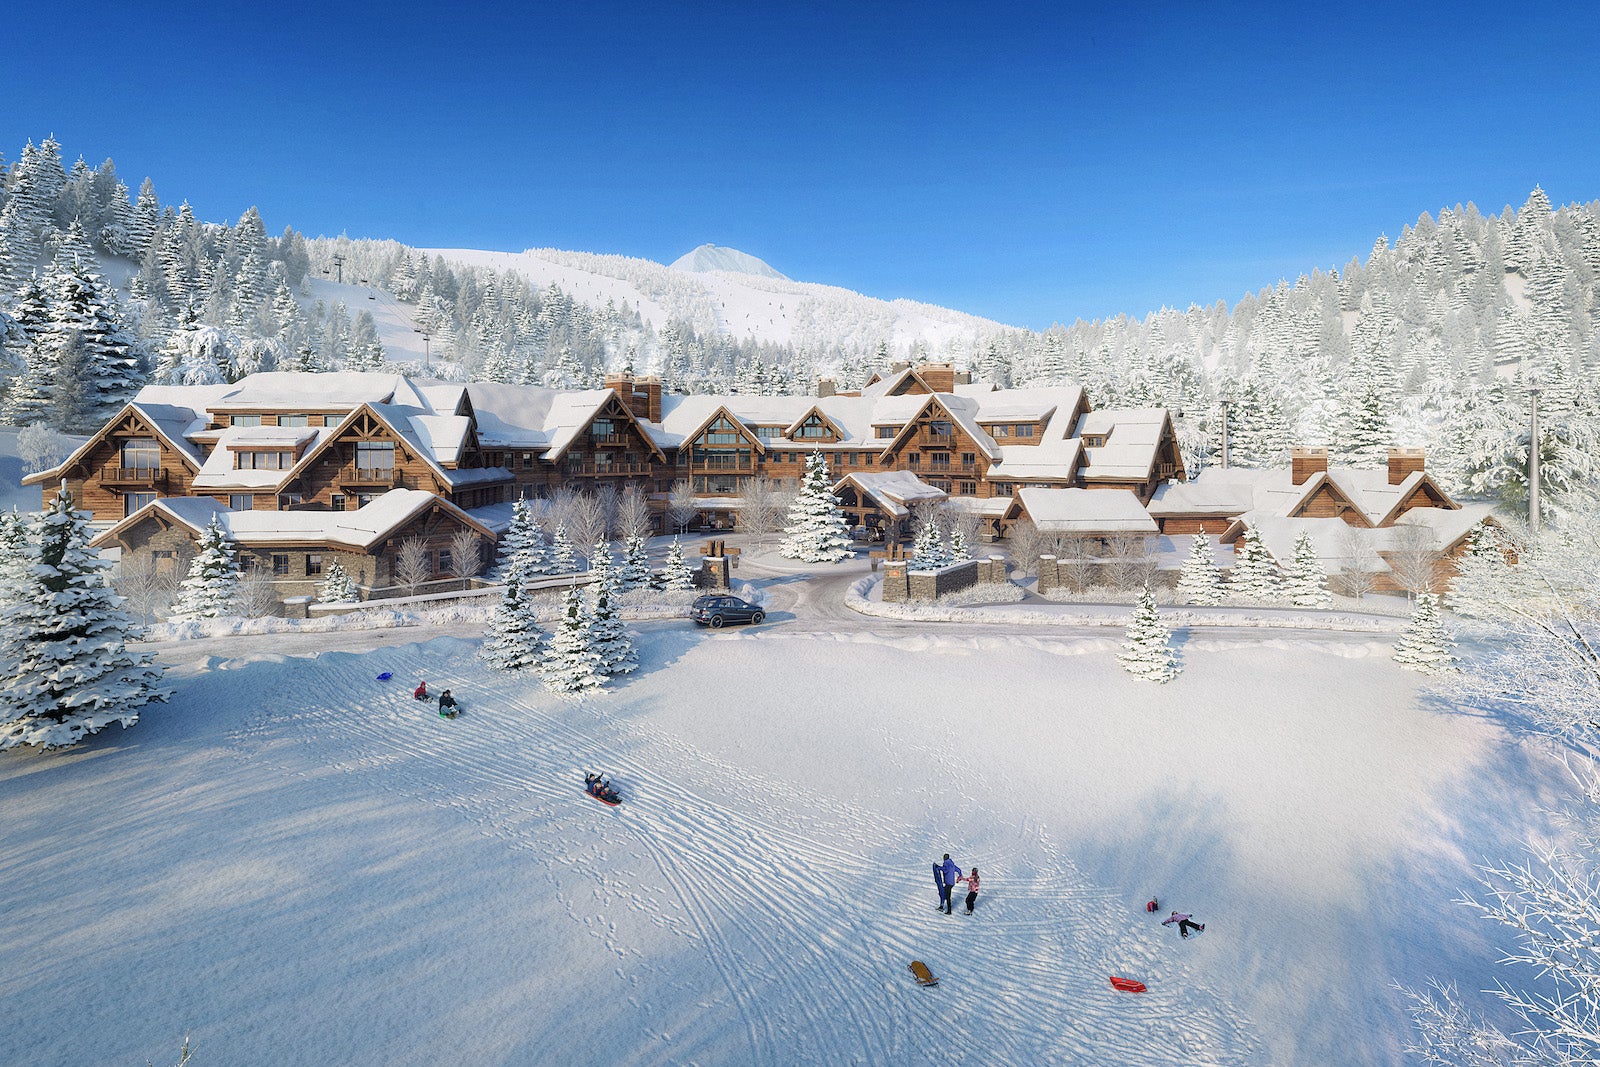 snow ski chalet/resort with snow-capped mountains, tall pine trees and people playing in the snow